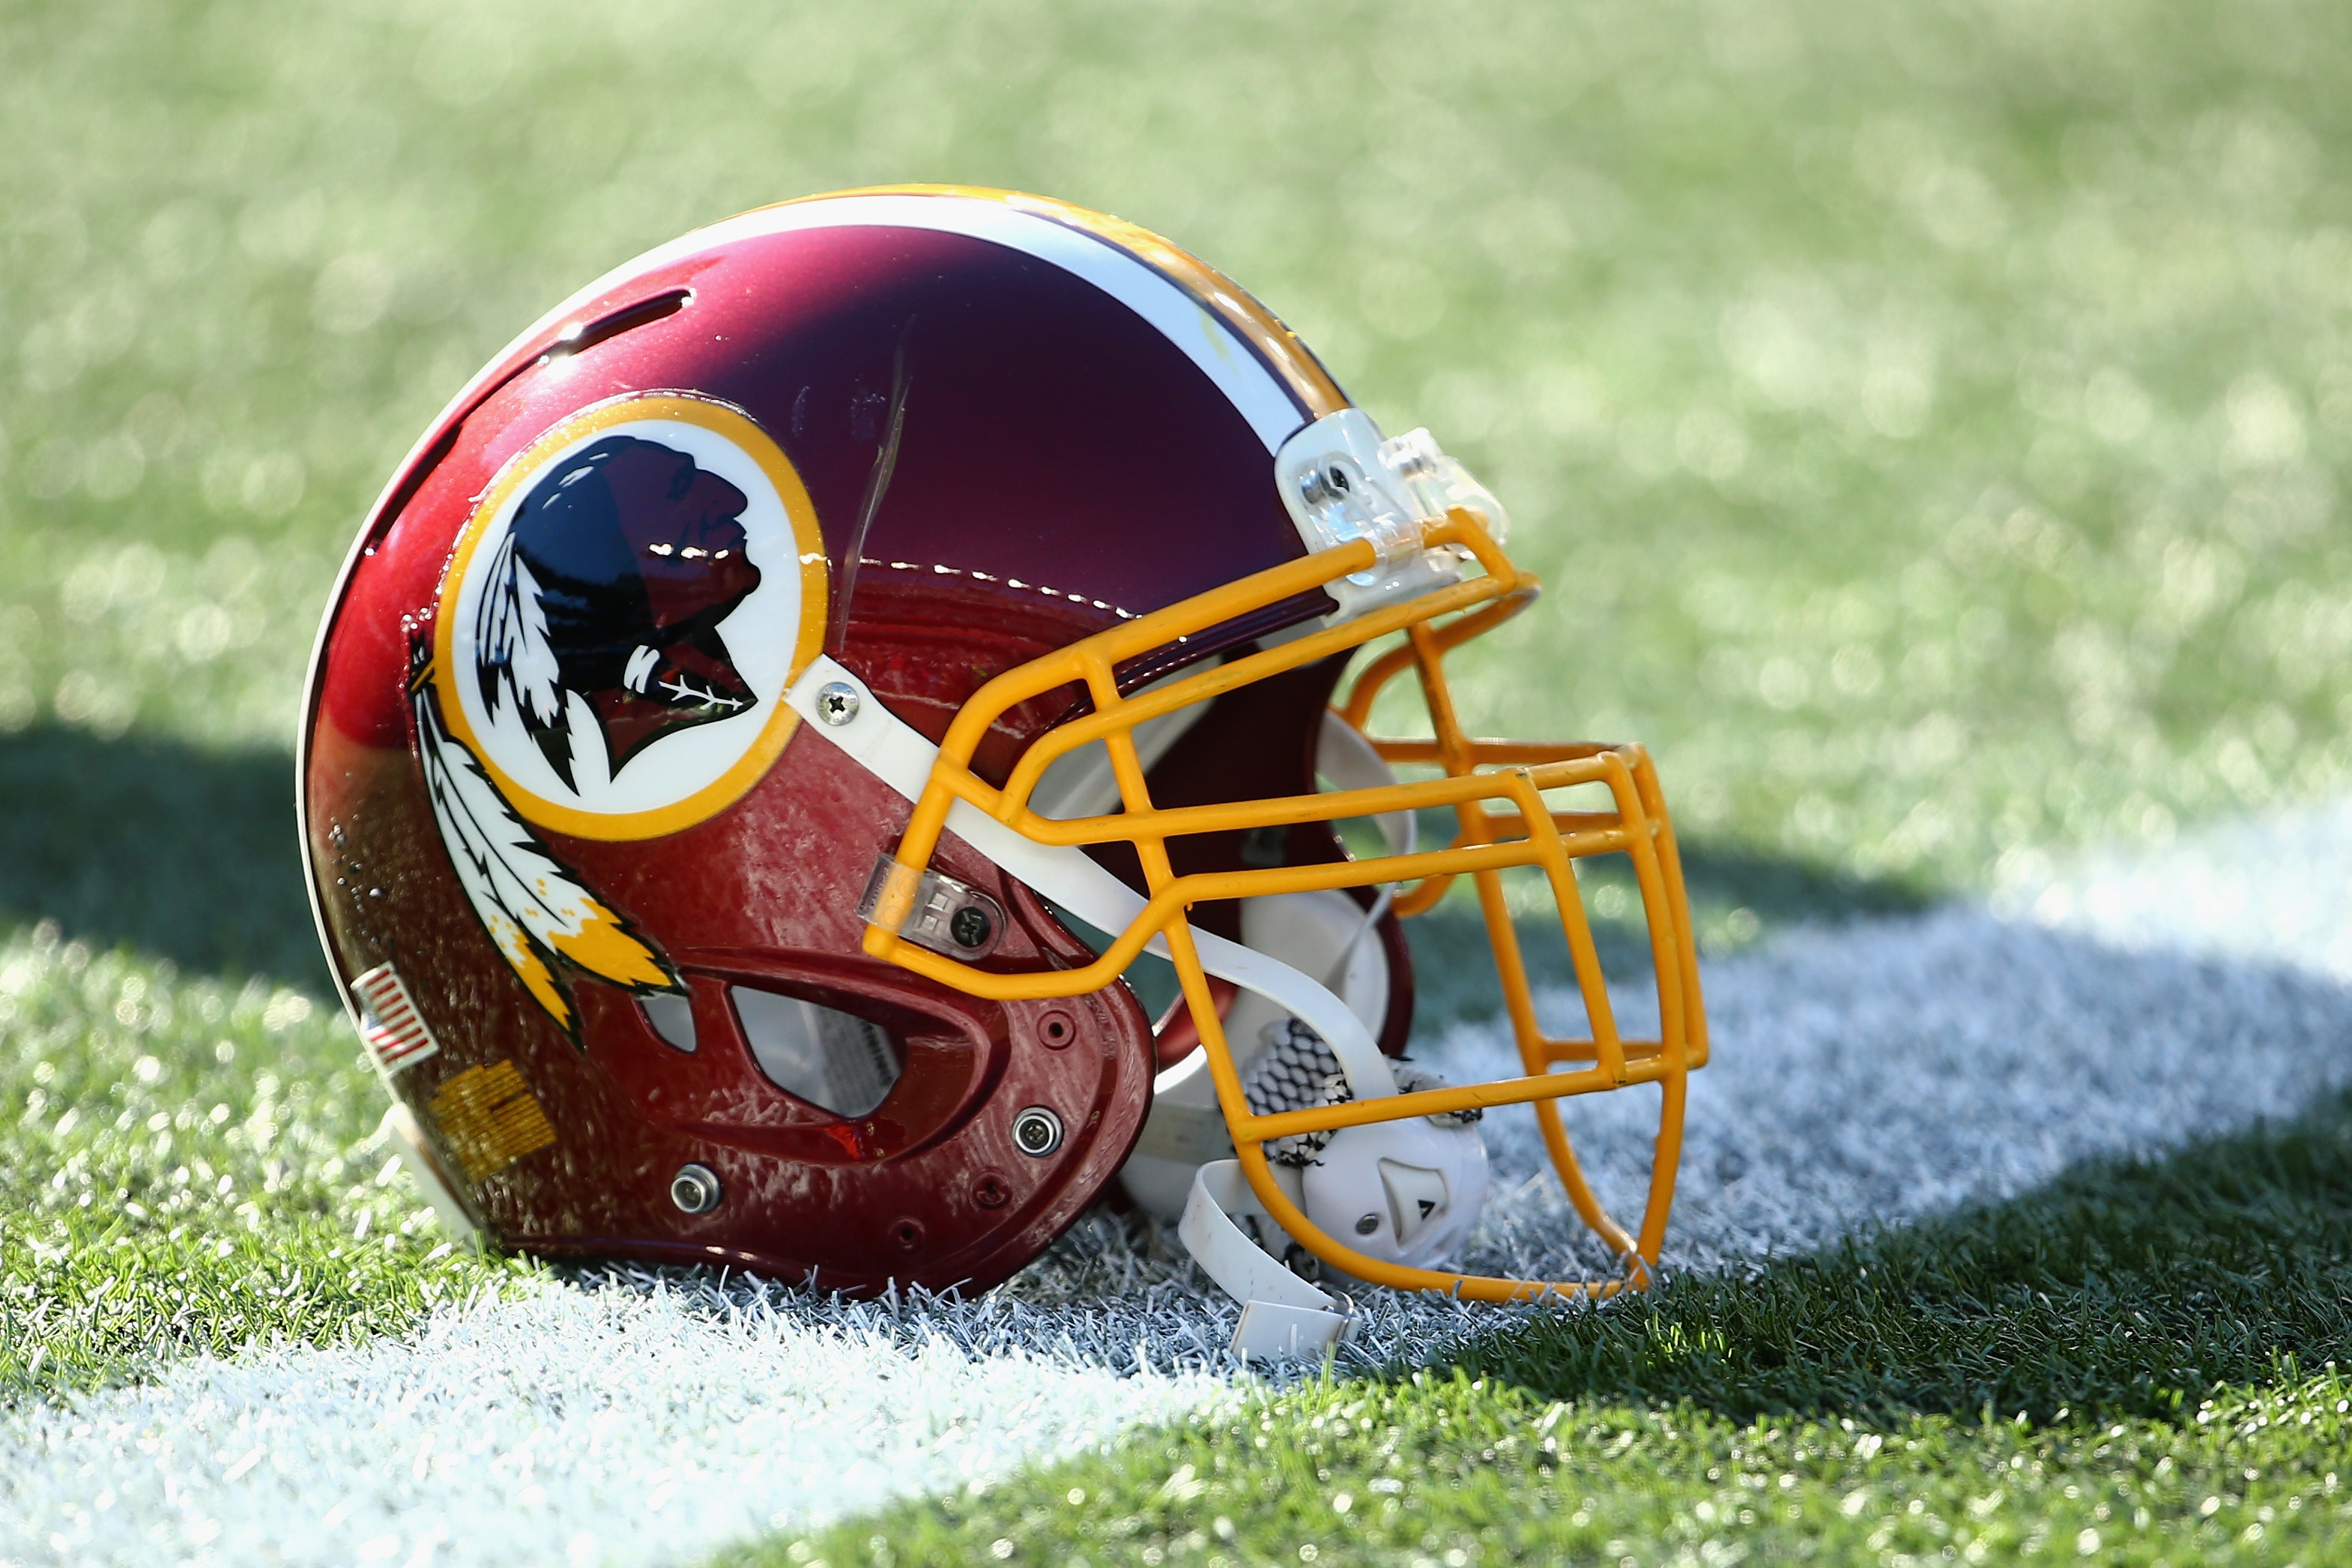 A Washington Redskins helmet before the game against the New England Patriots at Gillette Stadium on November 8, 2015 in Foxboro, Massachusetts. (Maddie Meyer—Getty Images)